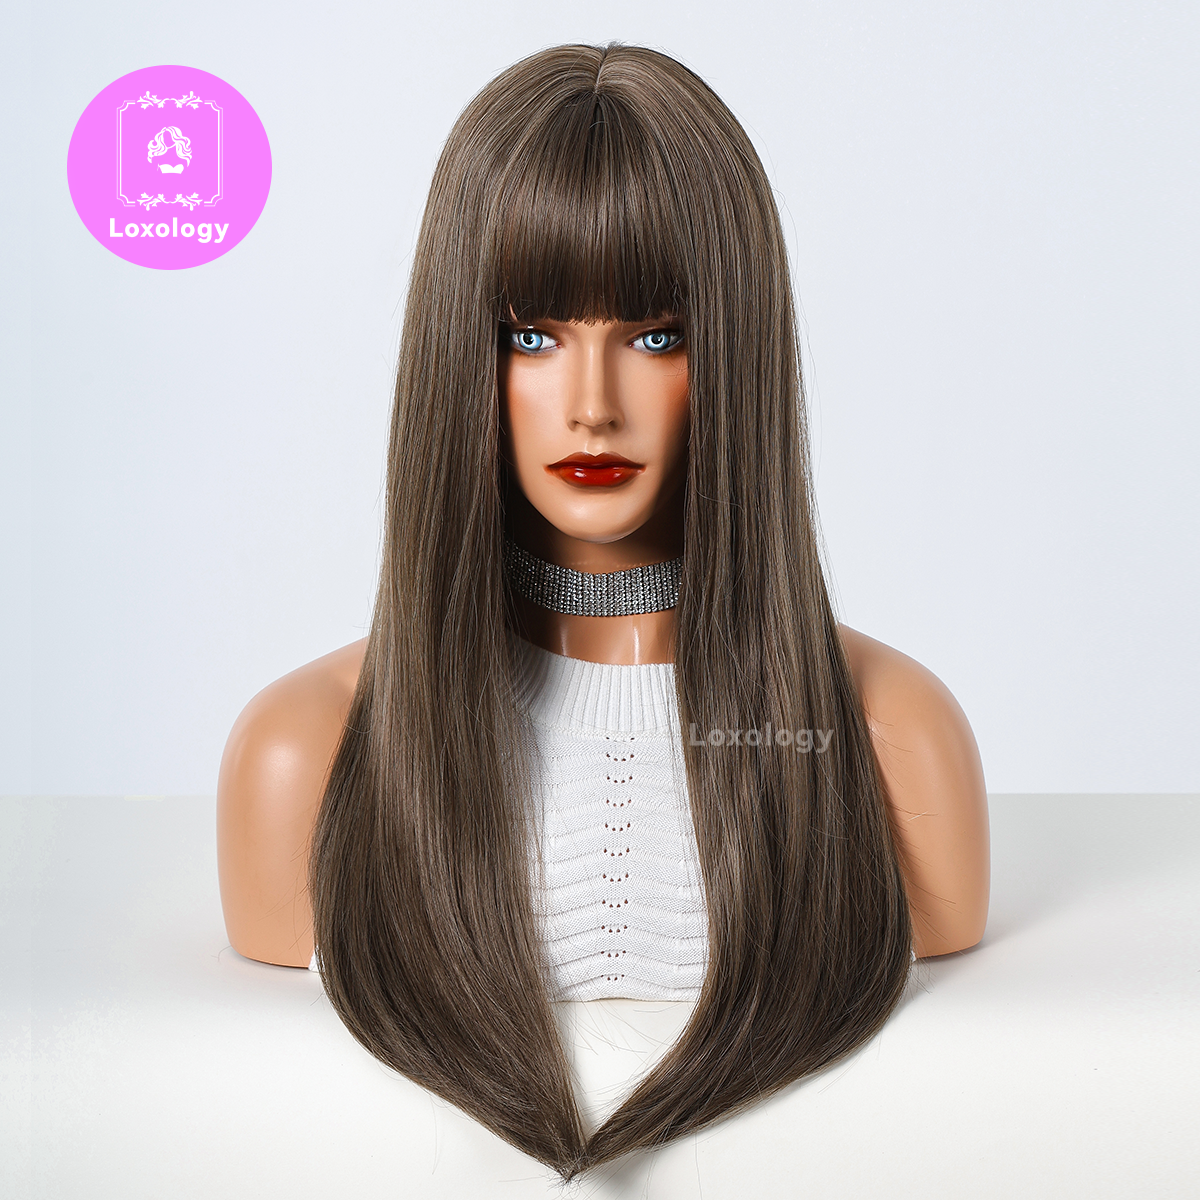 【Lily】Loxology | 30 Inch long straight wigs light brown  with bangs wighs